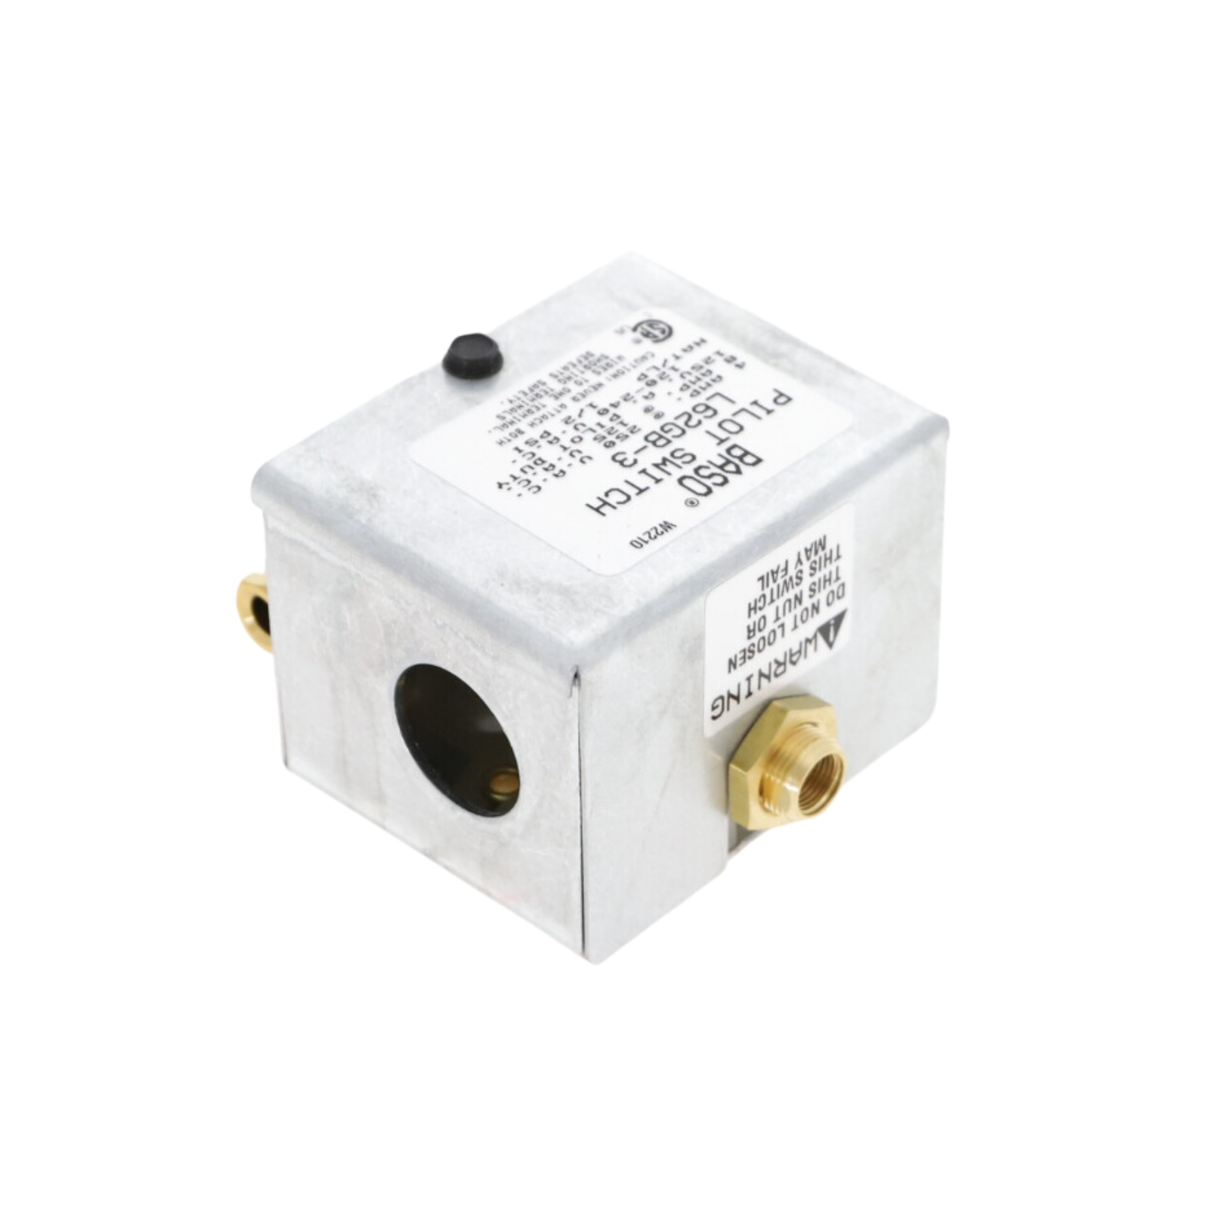 Baso L62GB-3 1/4" Gas Connection, Manual Reset, SPST Pilot Safety Switch with 100% Shutoff and Universal Mounting Plate